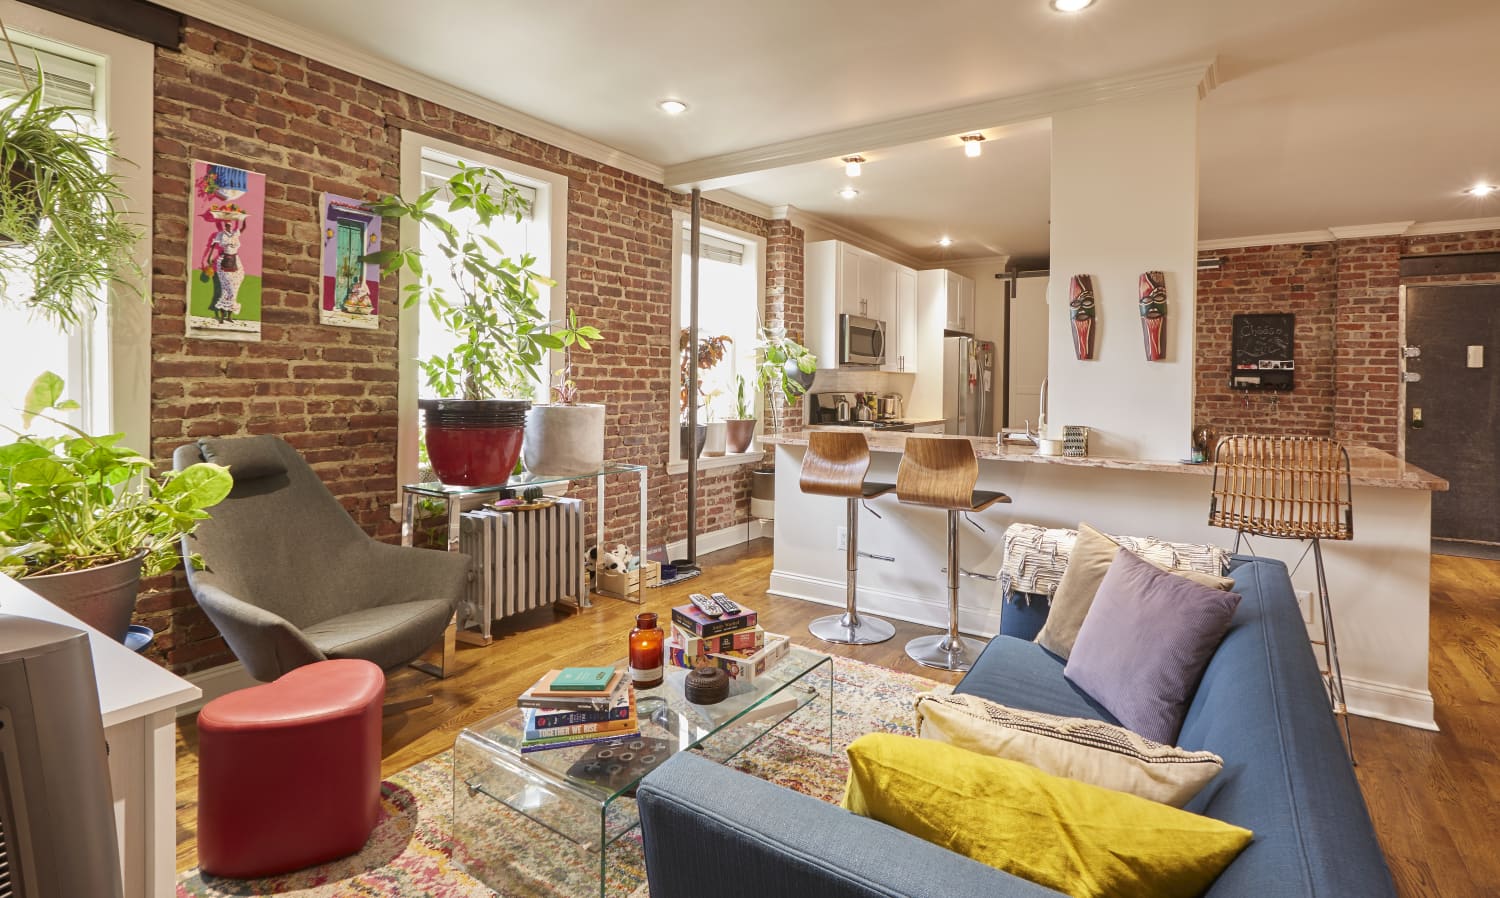 A Couple’s Bronx Apartment Has Gorgeous Brick Walls, Lots of Plants, and Tons of Style